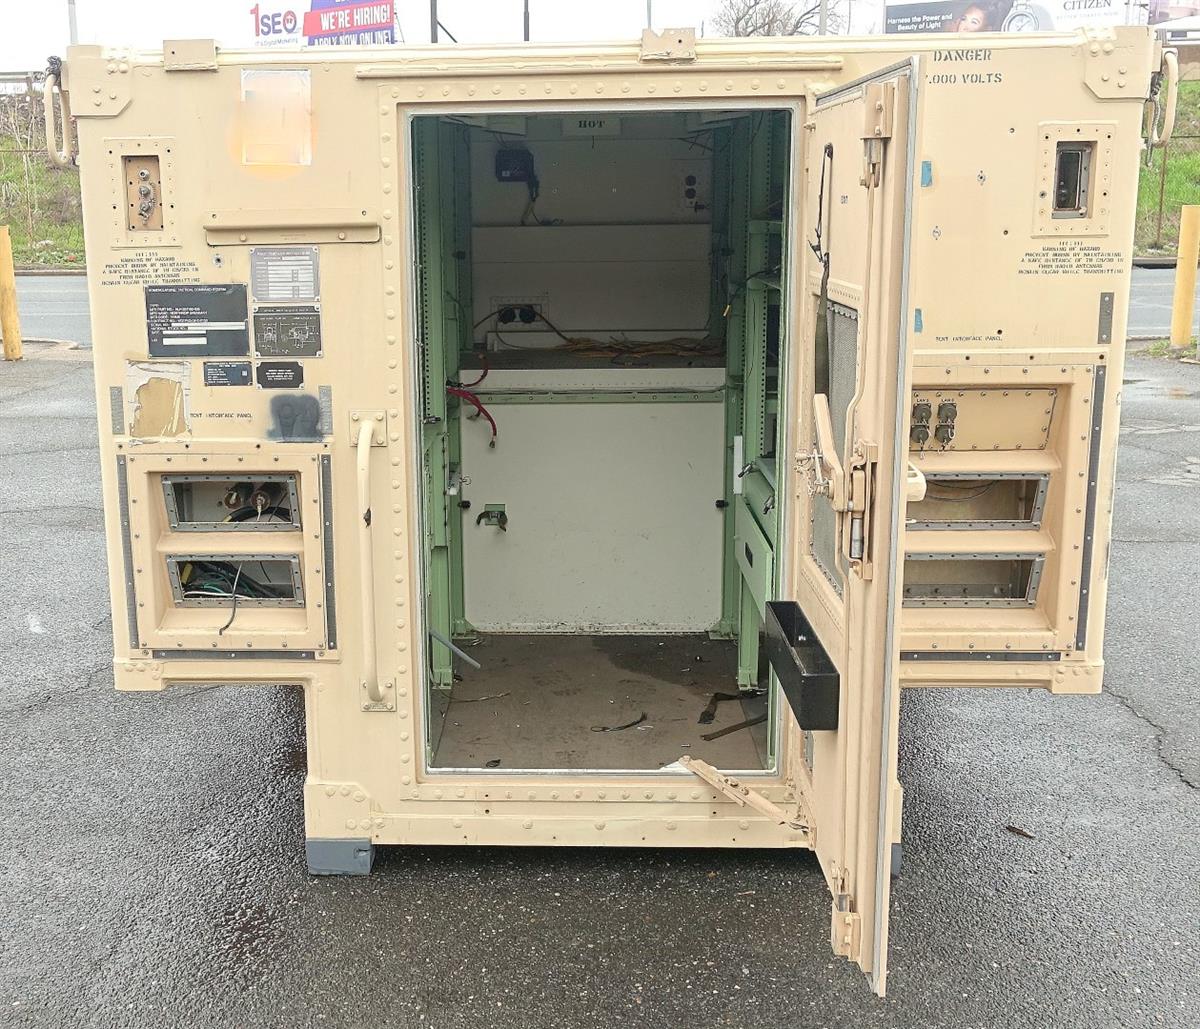 HM-909 | HM-909 S-788 Shielded Electrical Equipment Shelter for HMMWV USED (17).JPG